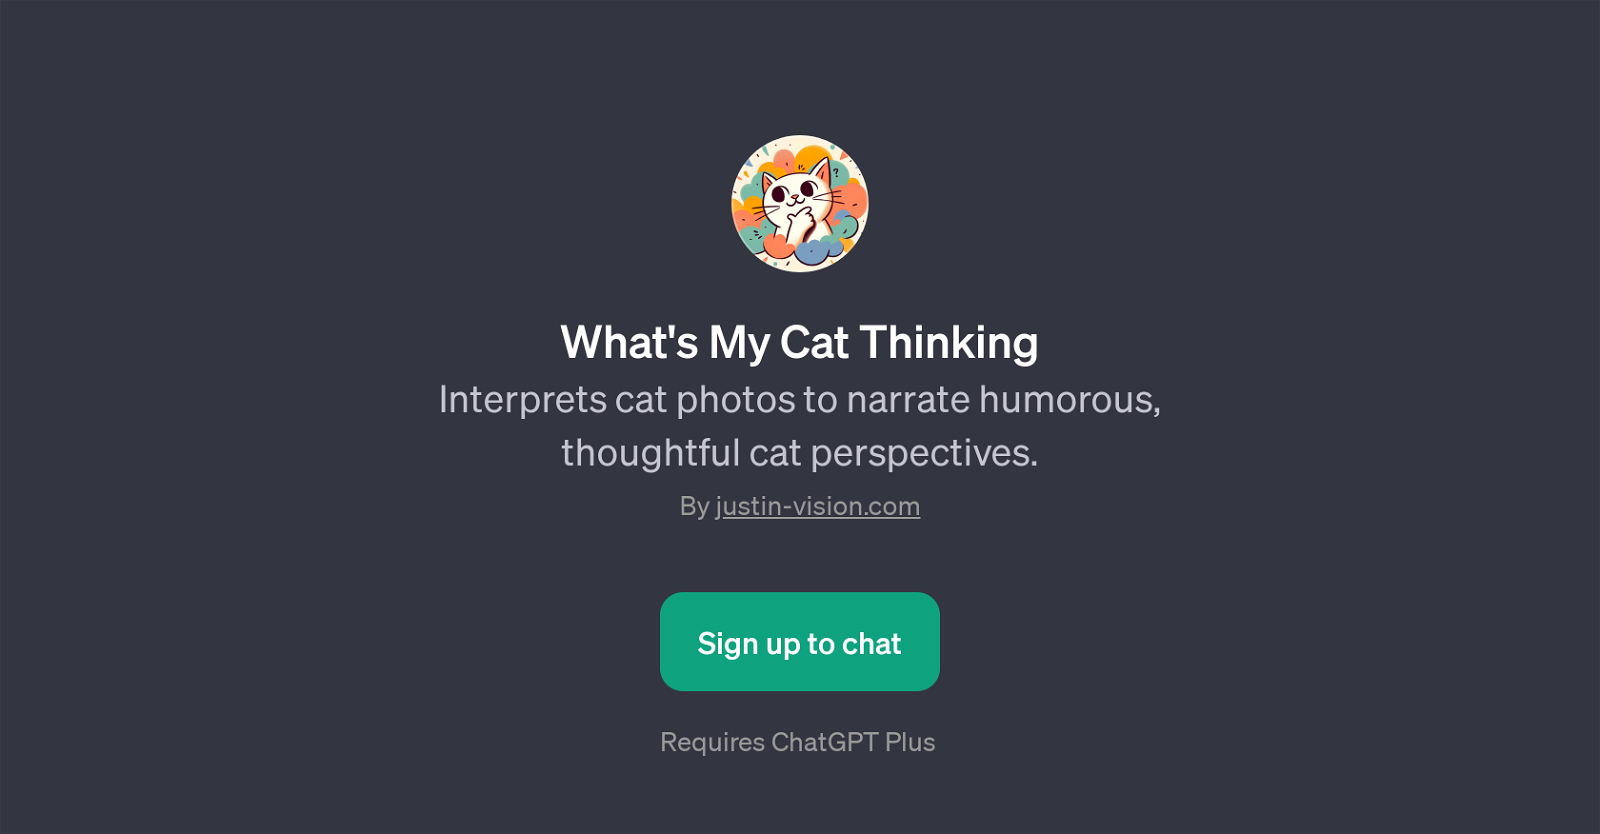 What's My Cat Thinking website